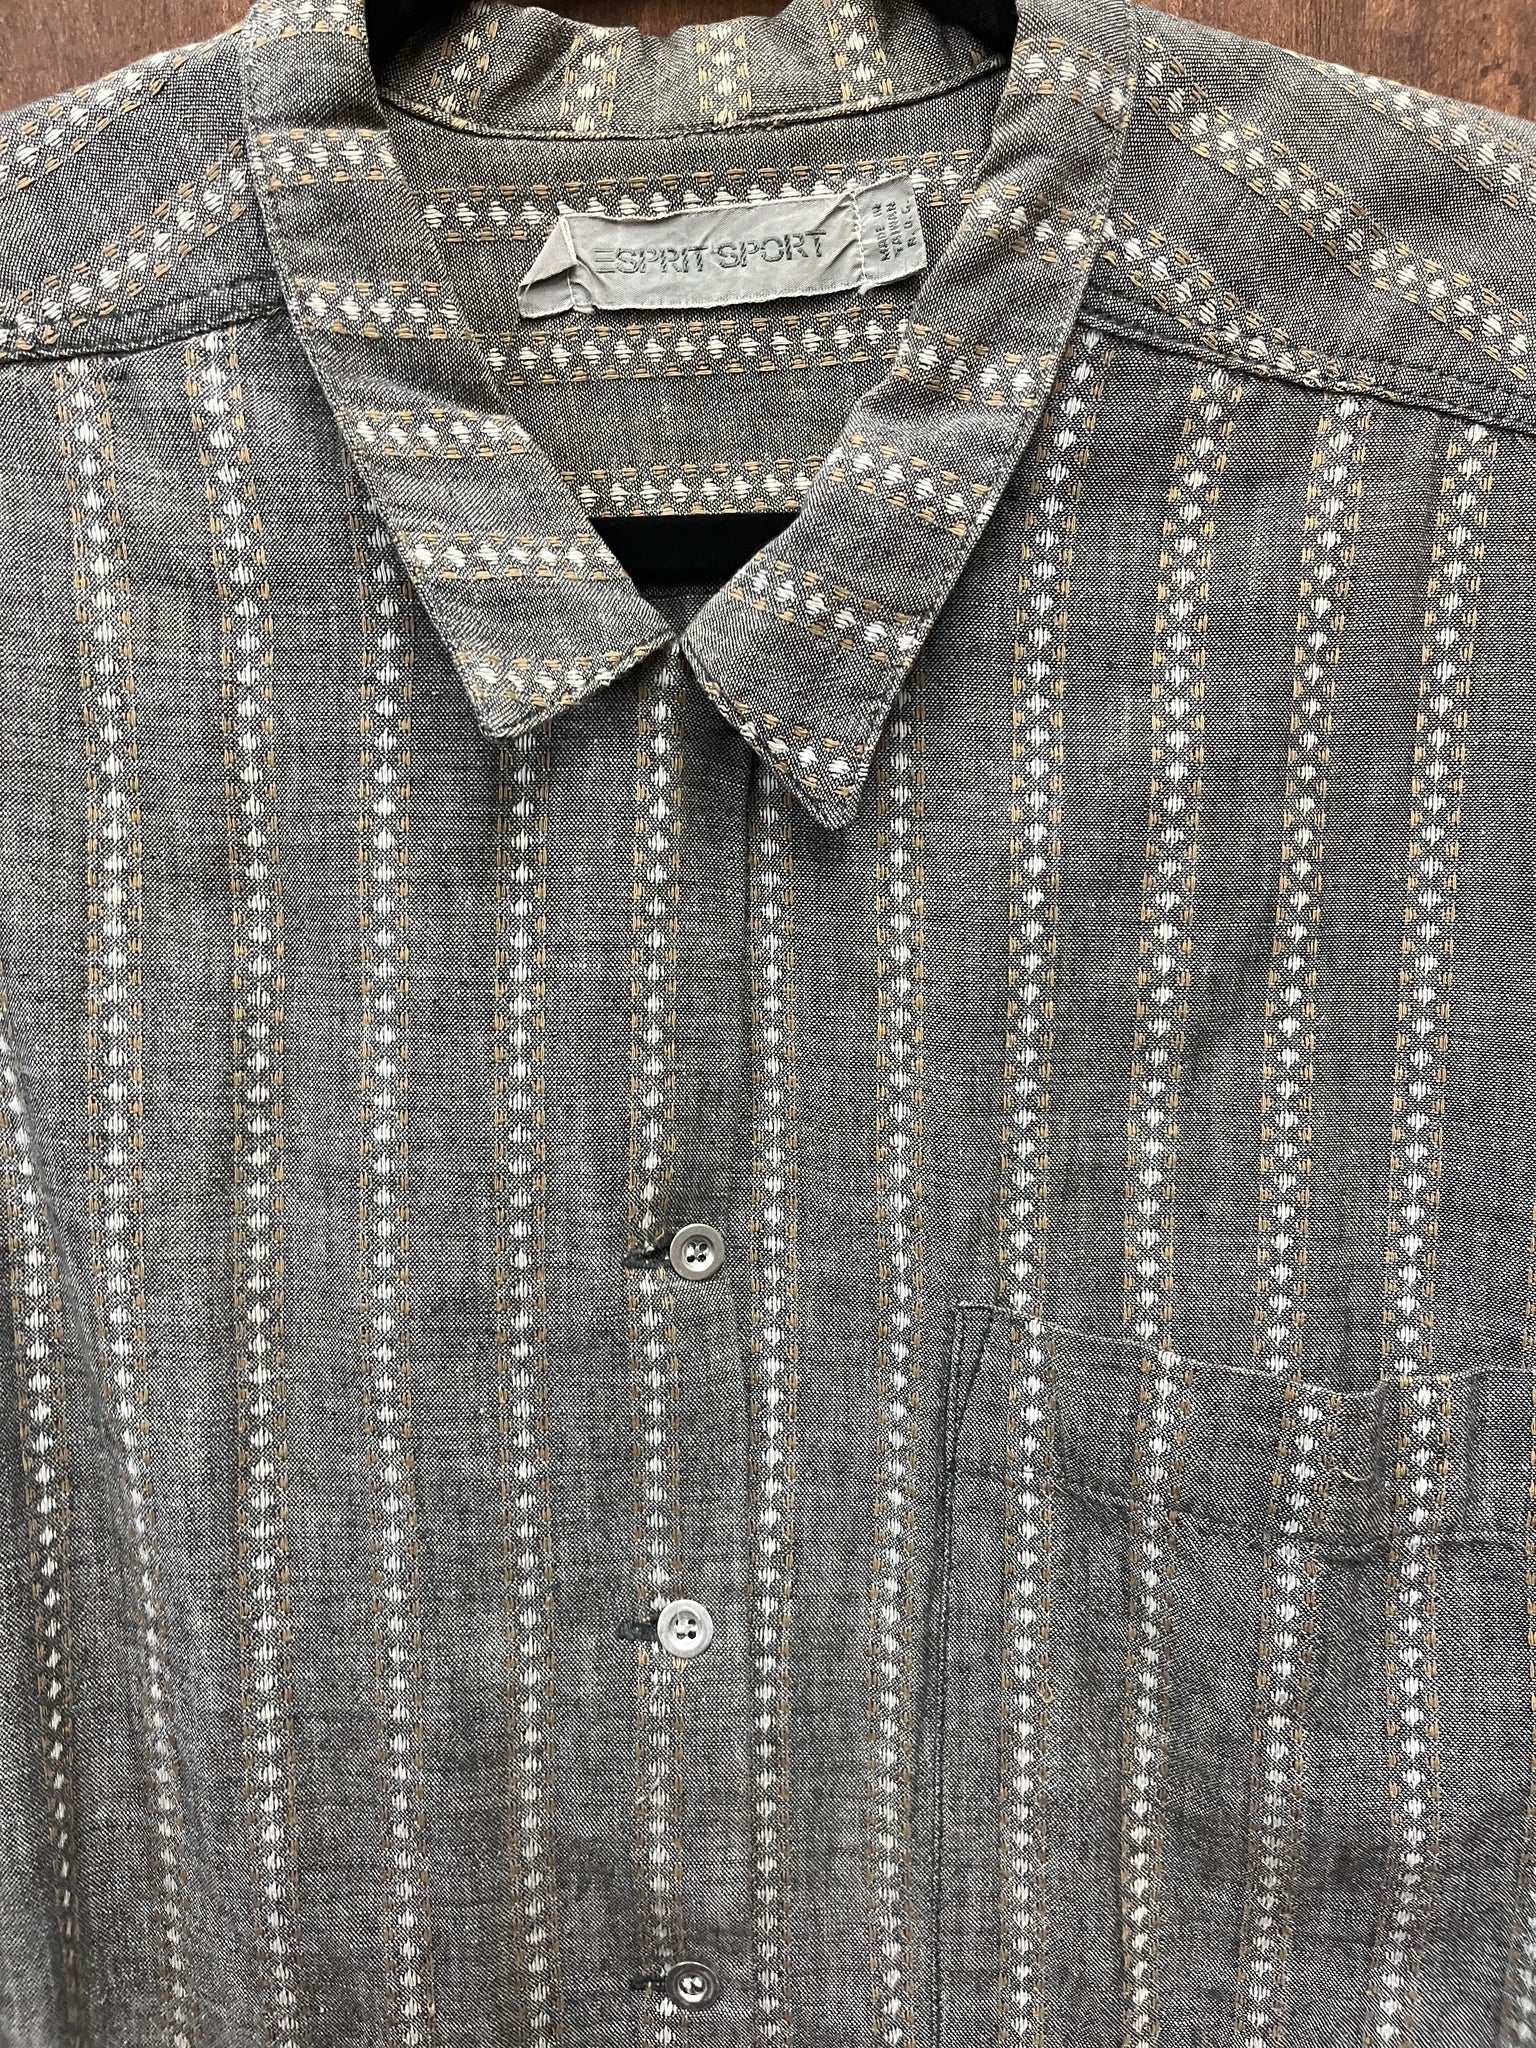 1990s TOPS- Esprit- Grey striped ticking l/s button up